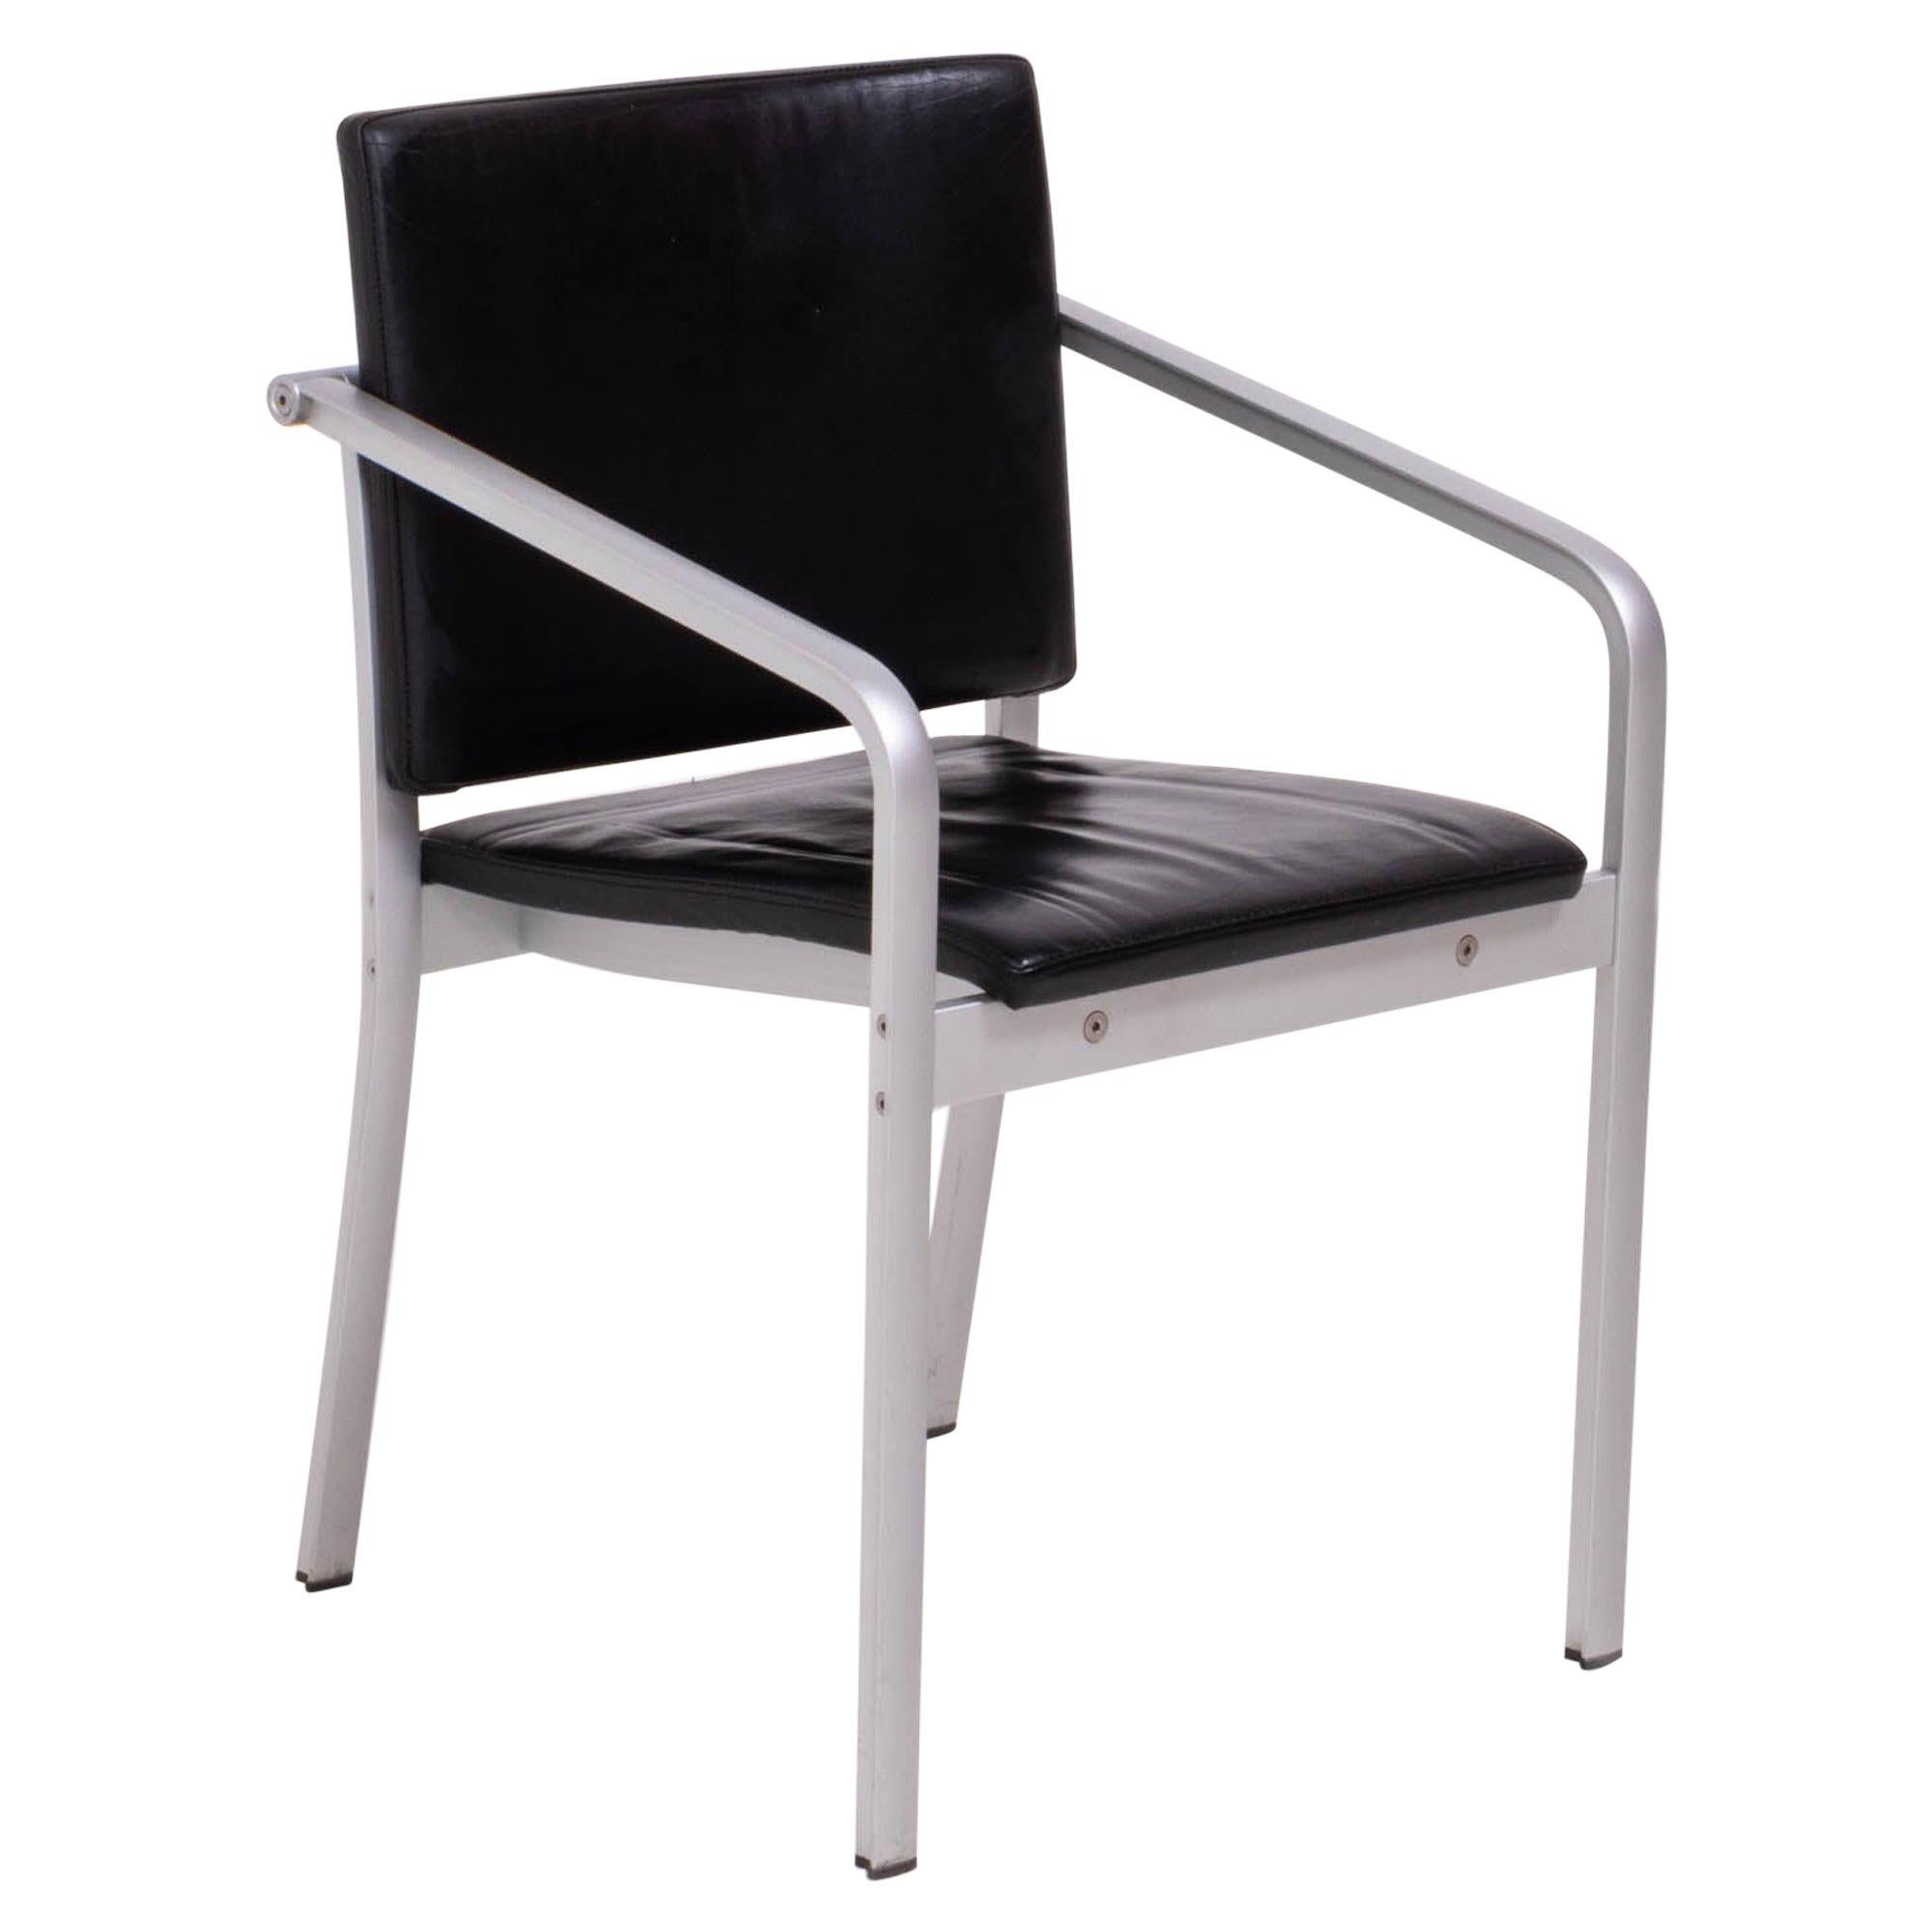 Thonet by Norman Foster A901 PF Silver and Black Leather Dining Chairs